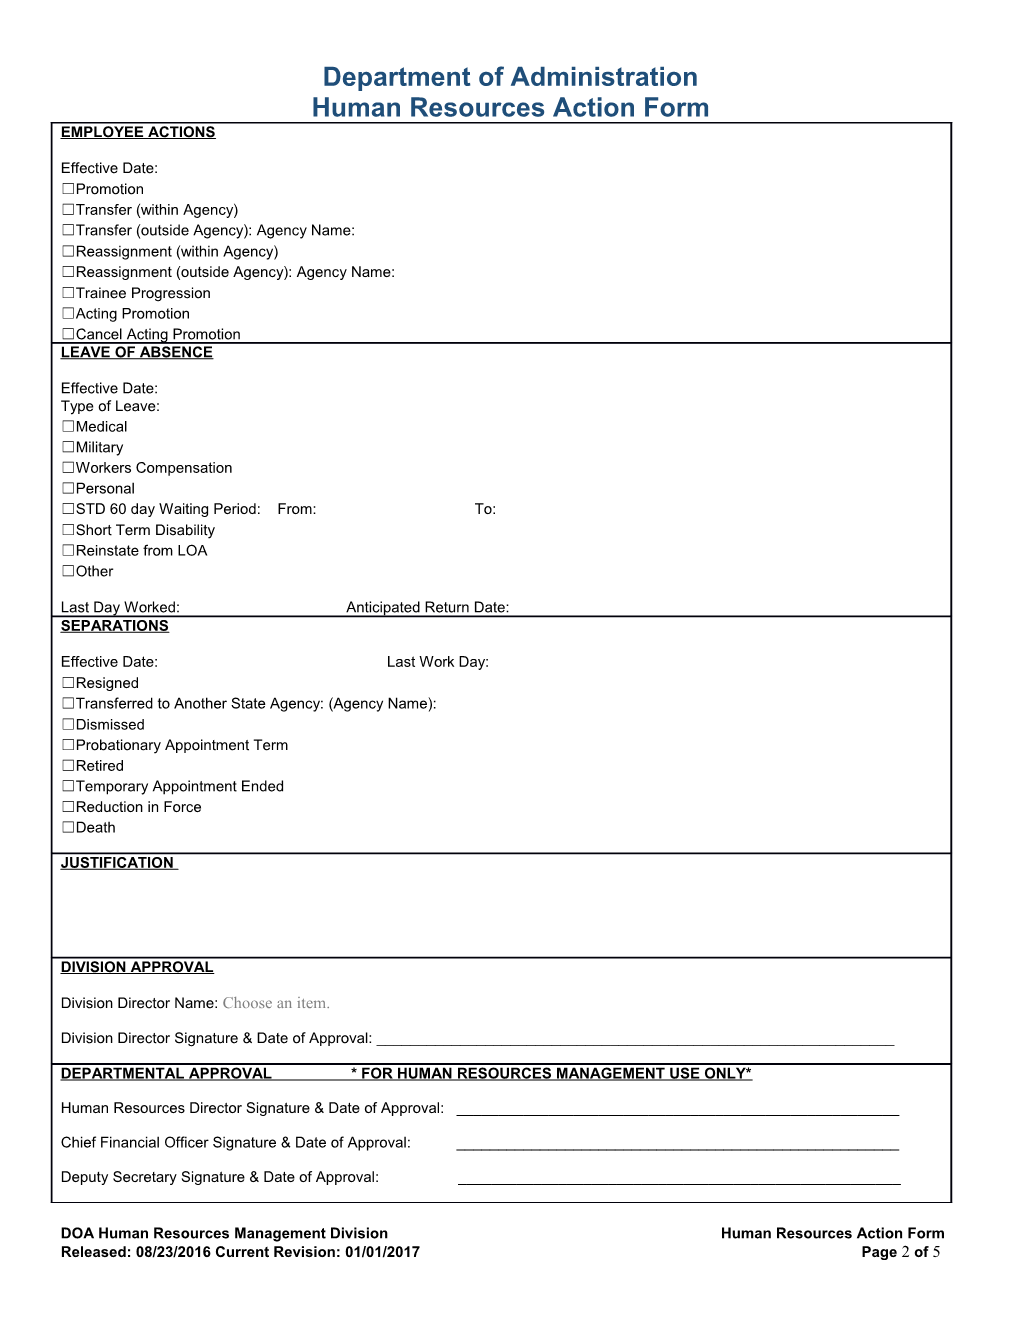 Human Resources Action Form